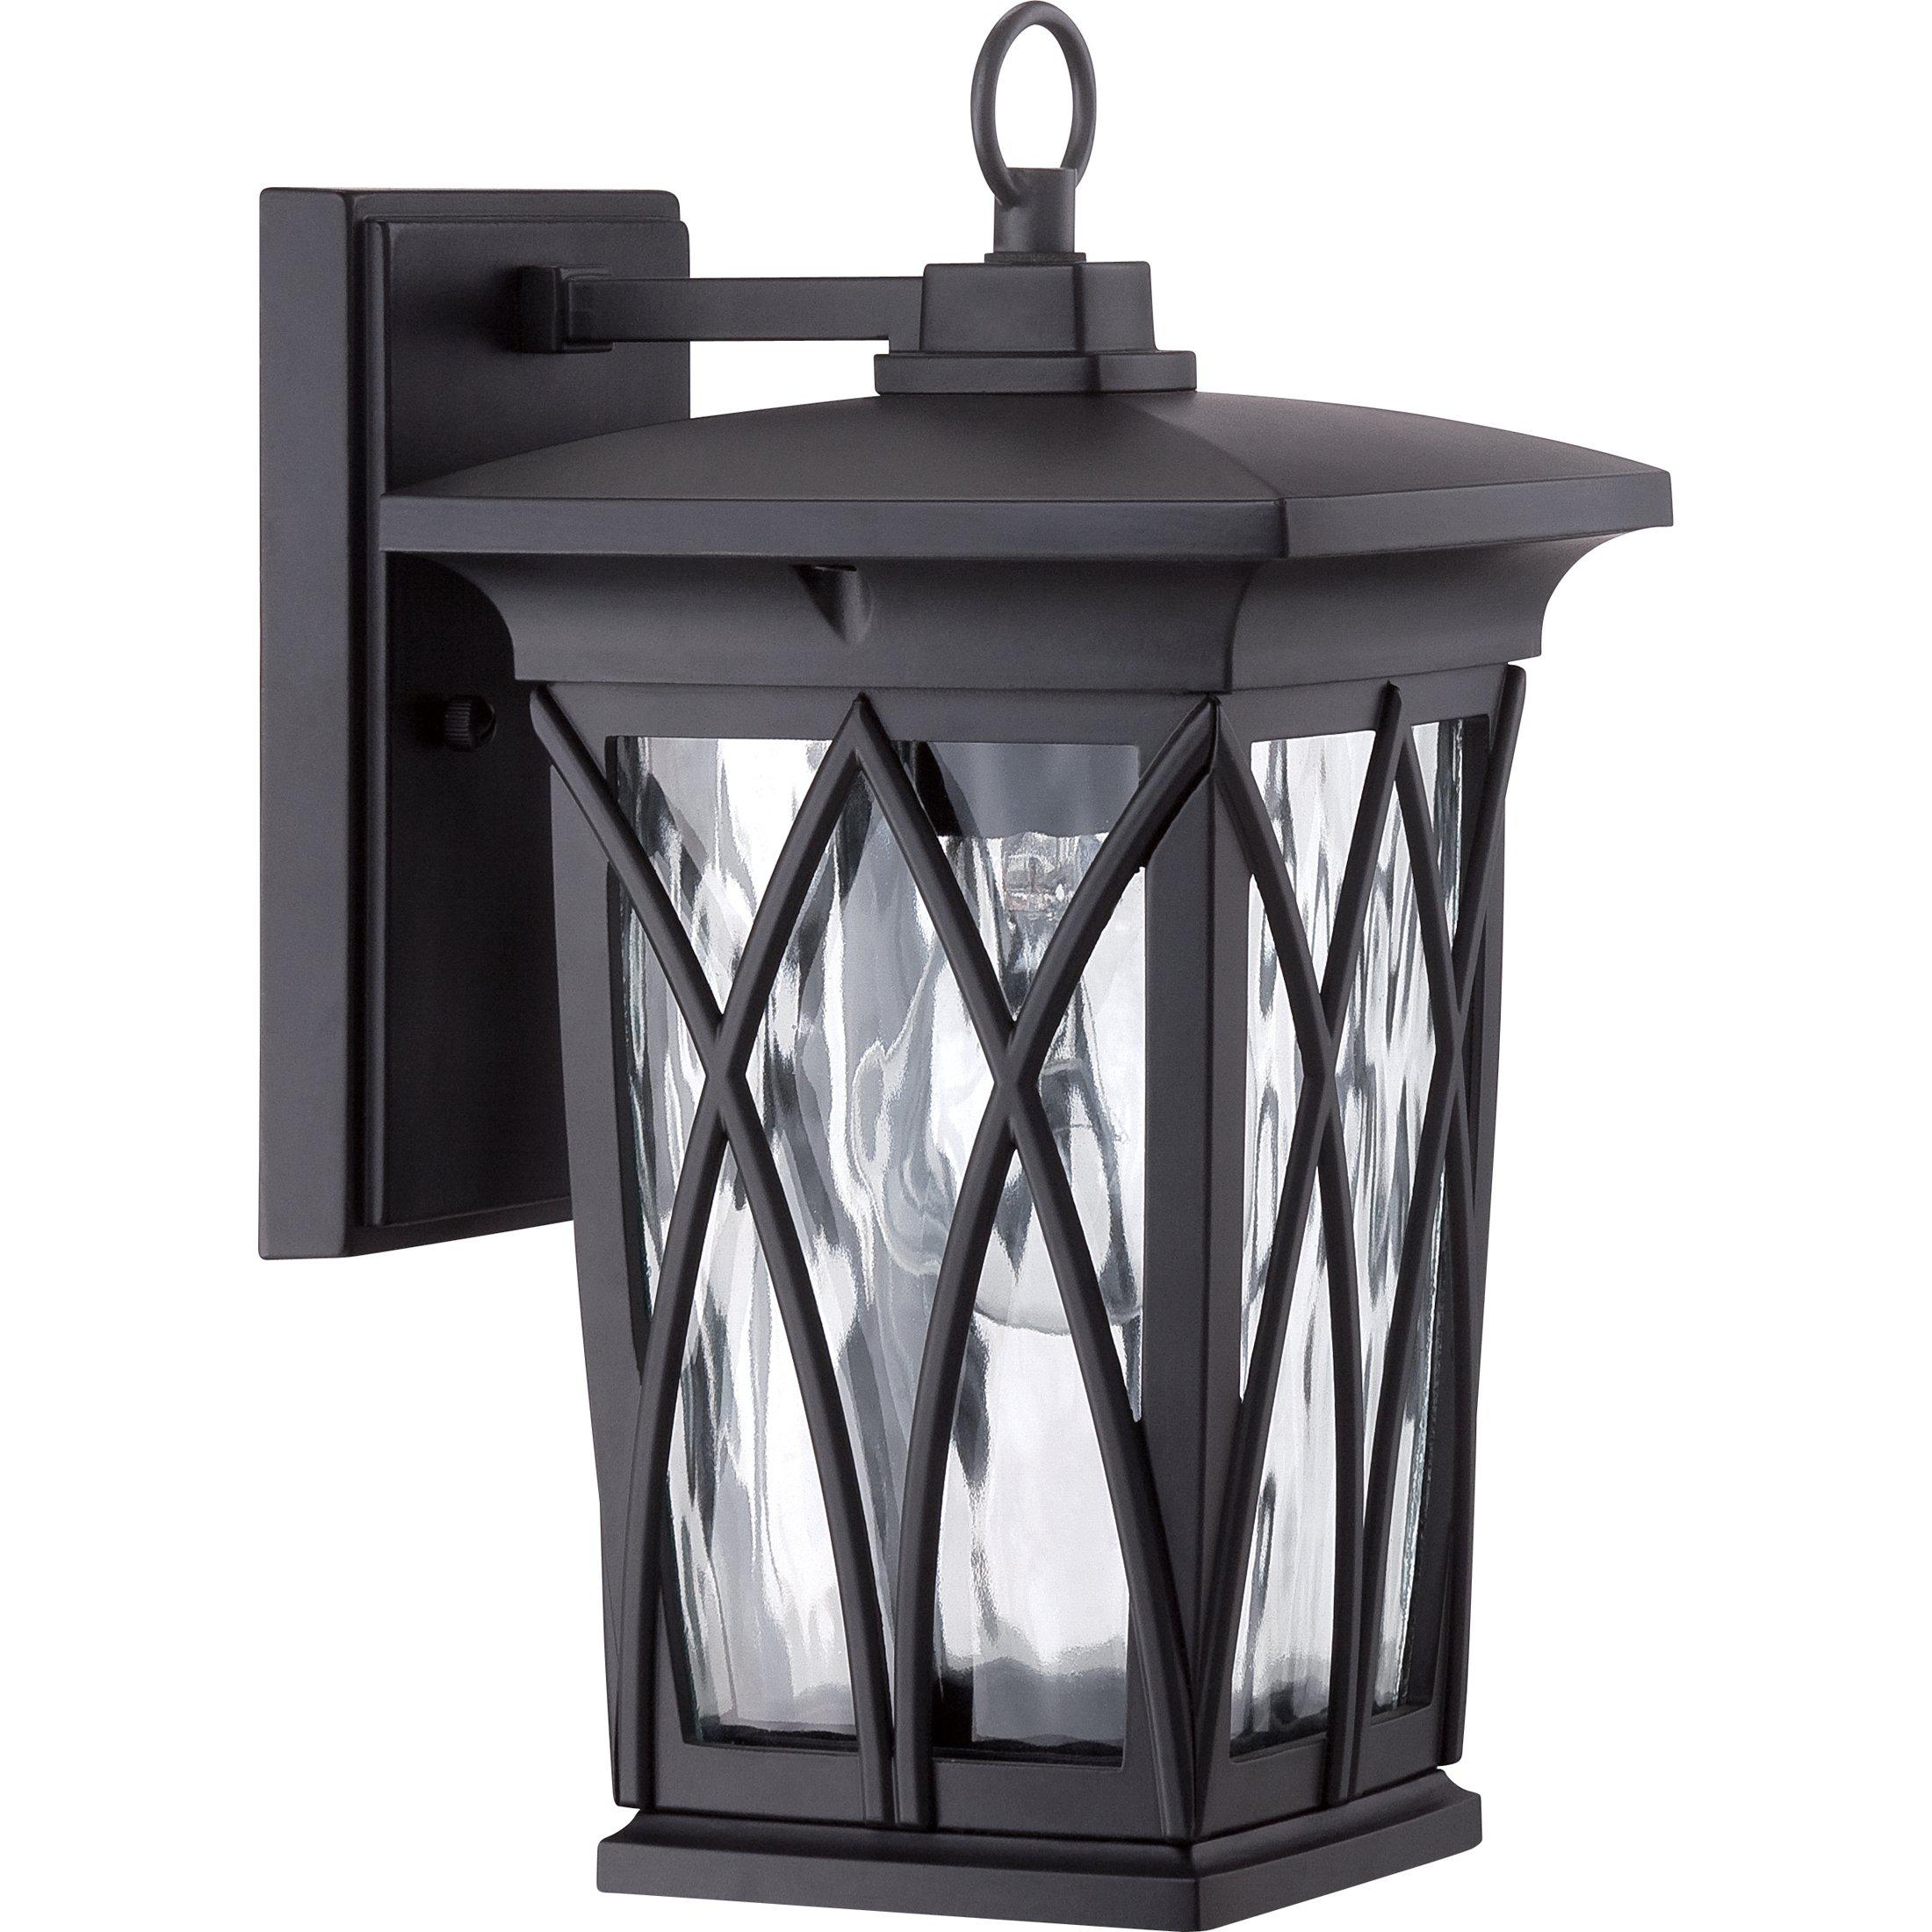 Quoizel  Grover Outdoor Lantern, Small Outdoor l Wall Quoizel   